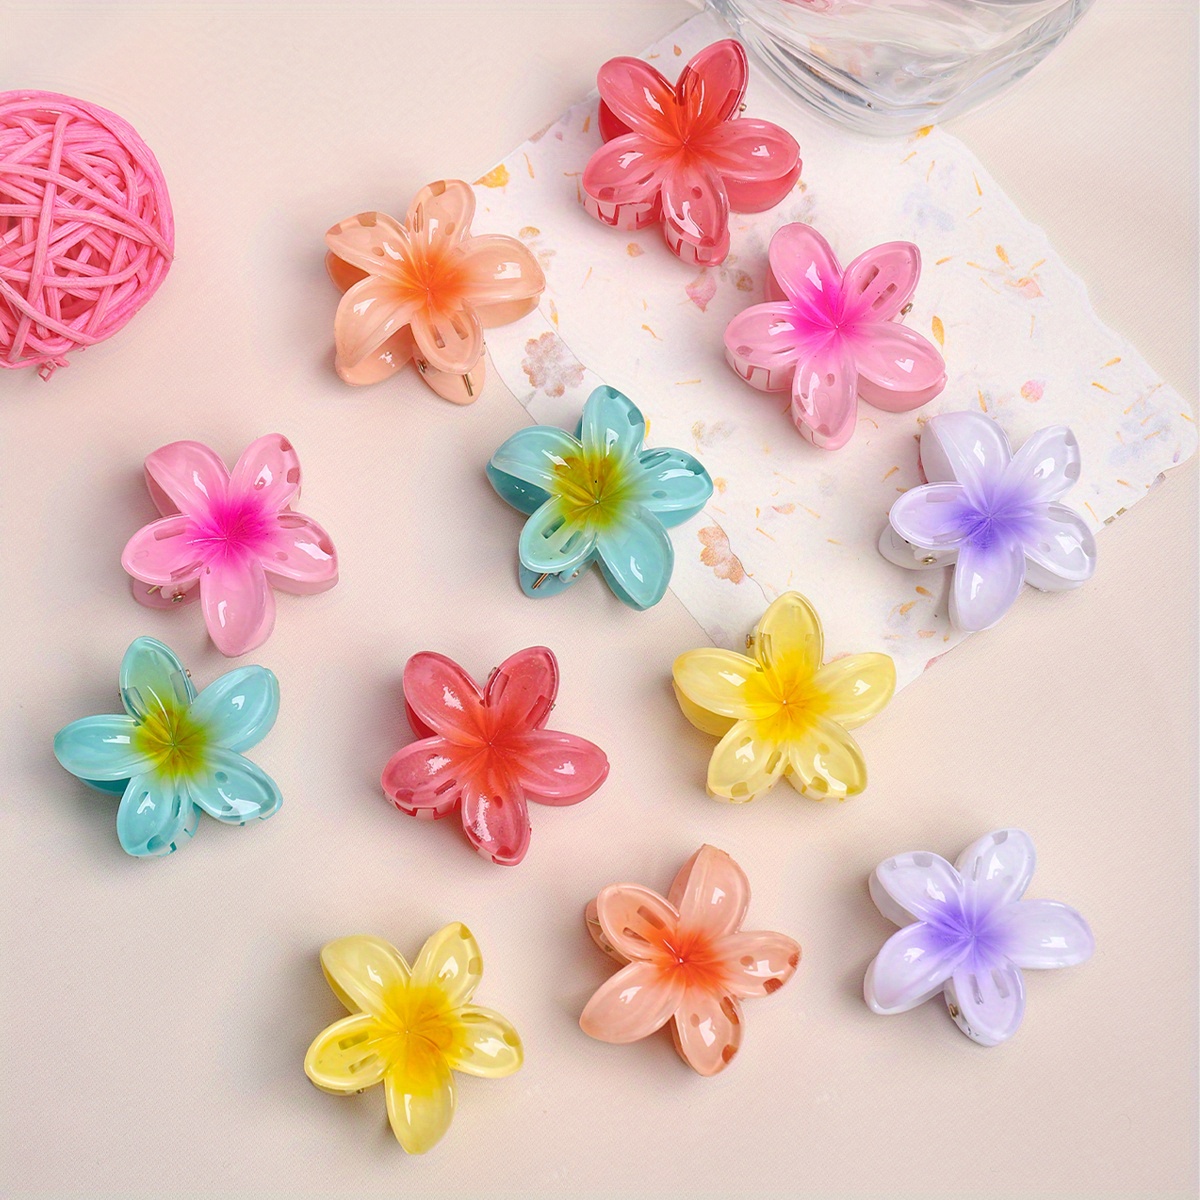 

12pcs Elegant Cute Flower Hair Claws Set, Gradient Color Jelly Bauhinia Anti-slip Hair Claws, Small Floral Design Hair Clips For Women, Party Accessories, Mixed Color Plastic - Ages 14+